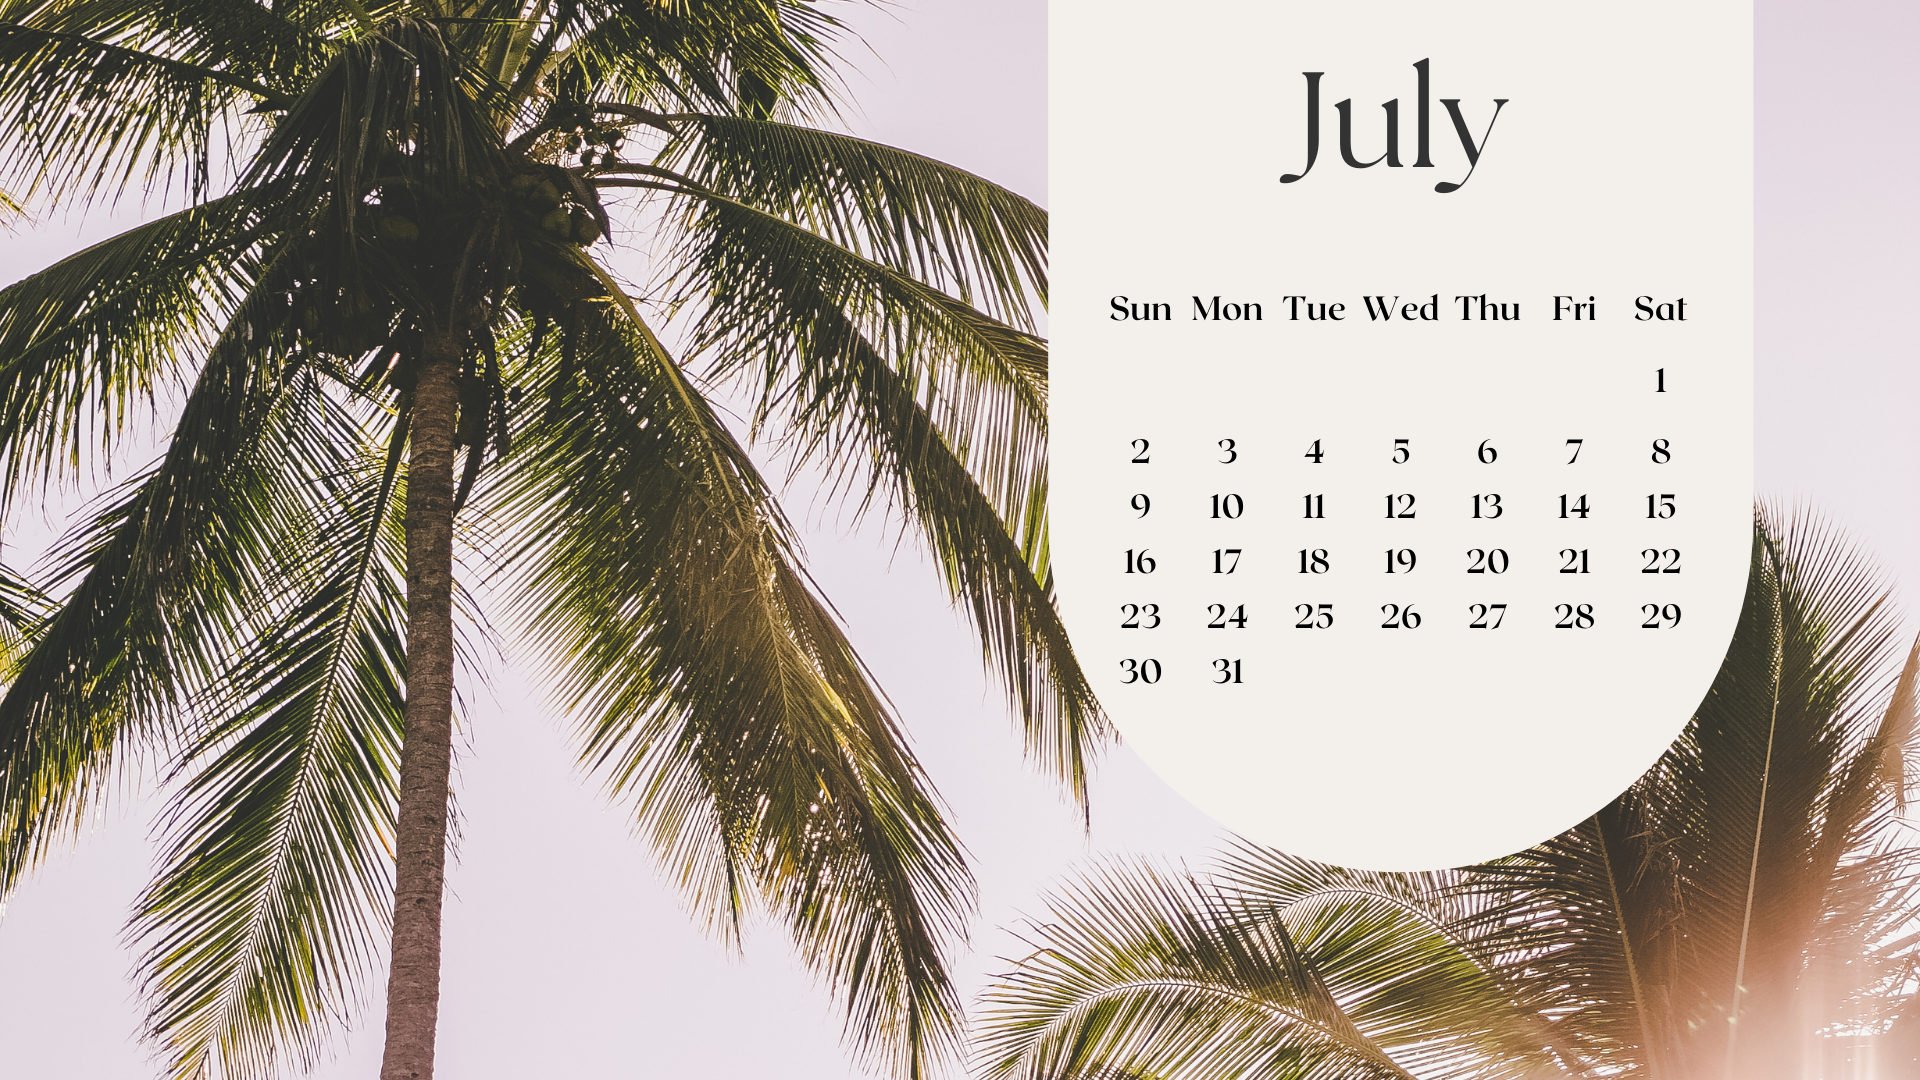 July 2023 desktop calendar backgrounds;  Here are your free July backgrounds for computers and laptops. Tech freebies for this month!